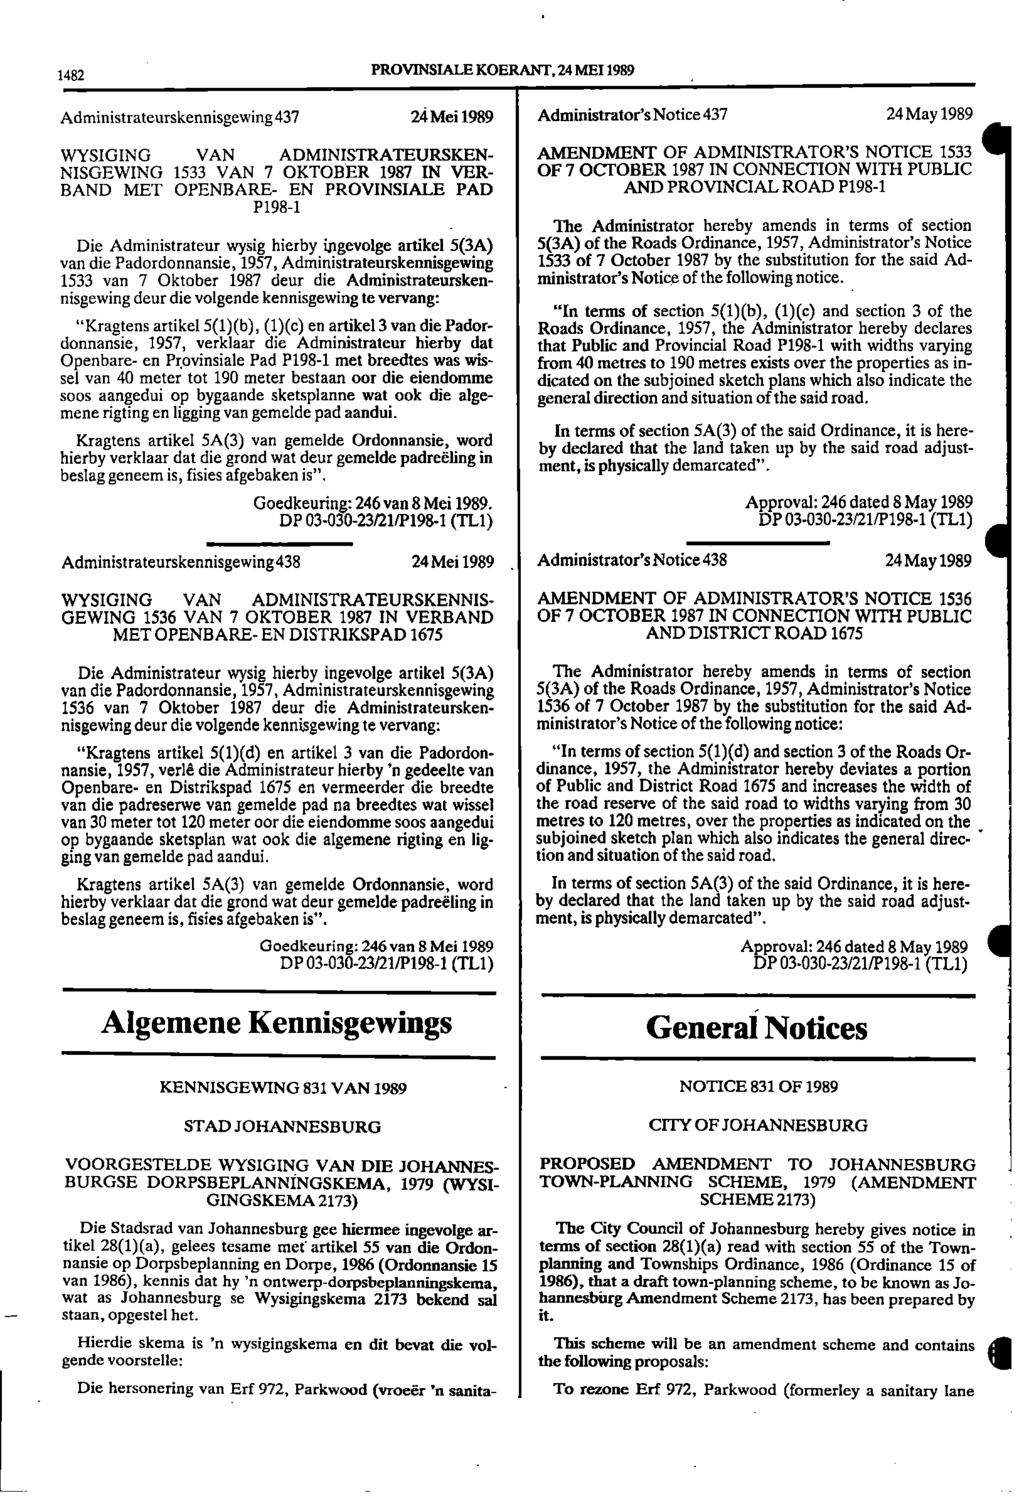 1482 PROVINSIALE KOERANT, 24 MEI 1989 Administrateurskennisgewing 437 24 Mei 1989 Administrator's Notice 437 24 May 1989 WYSIGING VAN ADMINISTRATEURSKEN AMENDMENT OF ADMINISTRATOR'S NOTICE 1533